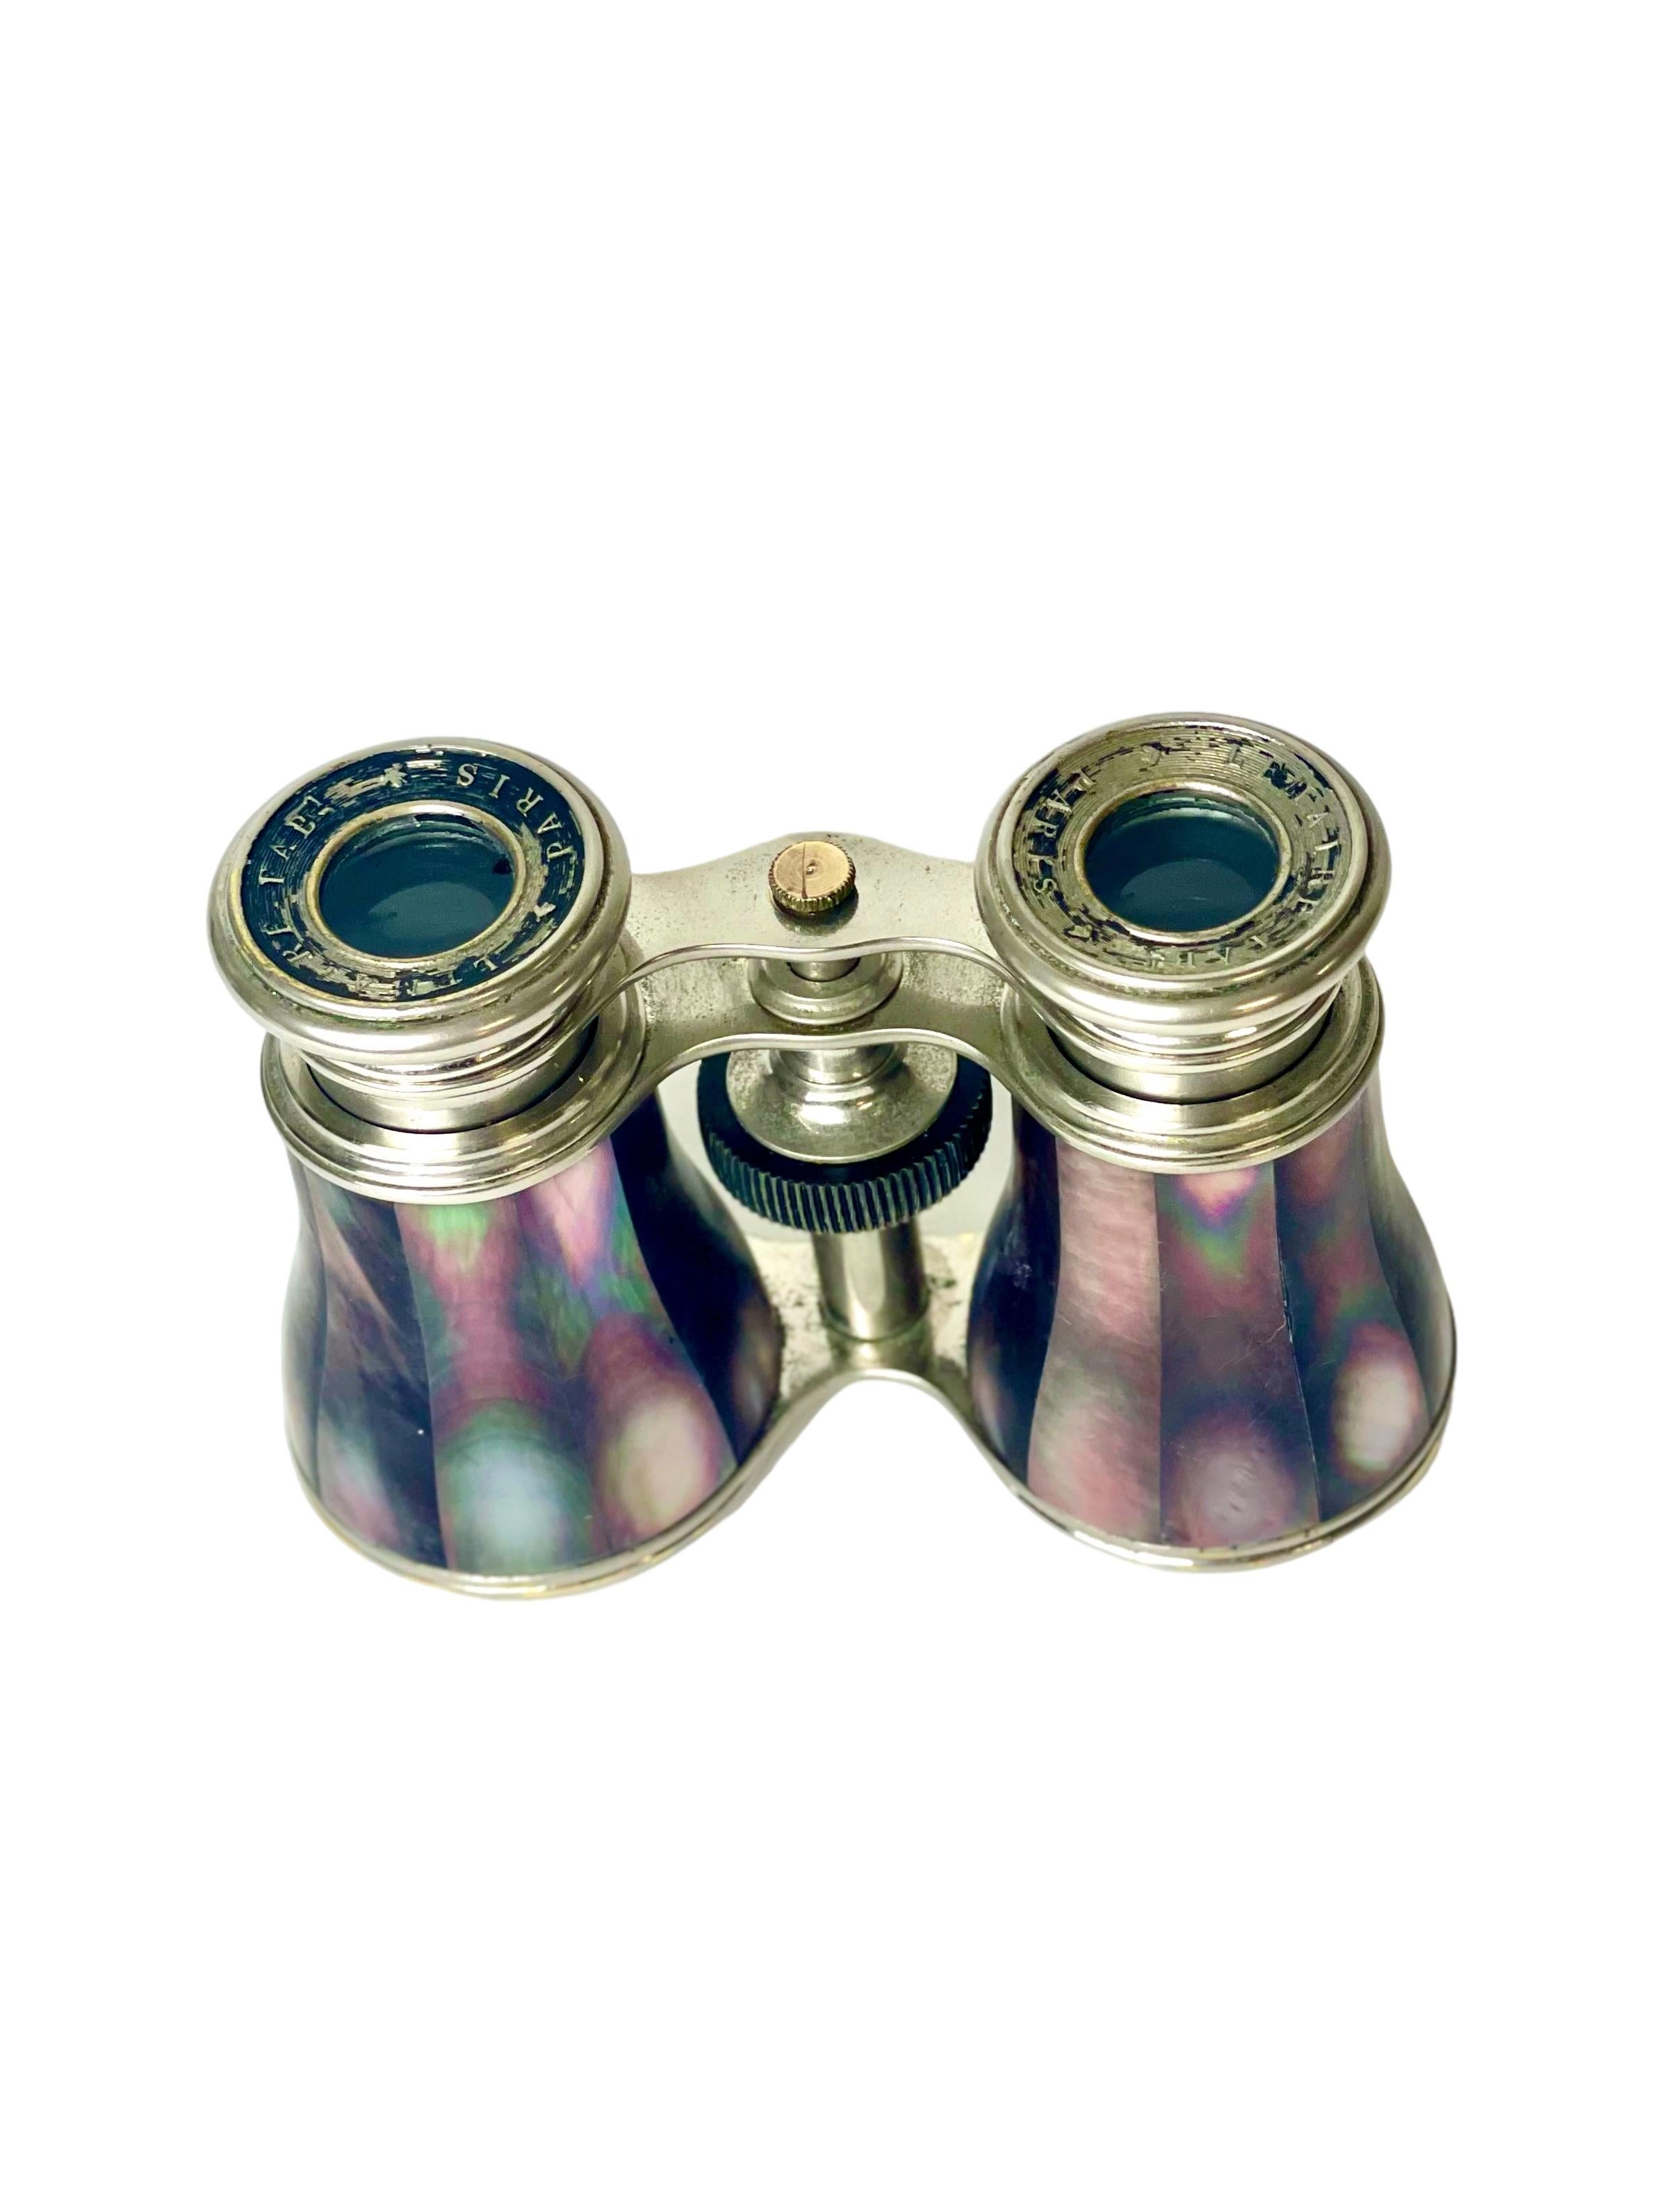 A pair of stunning miniature binoculars, or opera glasses, crafted from brass and clad in iridescent mother of pearl inlaid pieces. Dating from the late 19th to early 20th century, this practical accessory was a must-have for any member of the